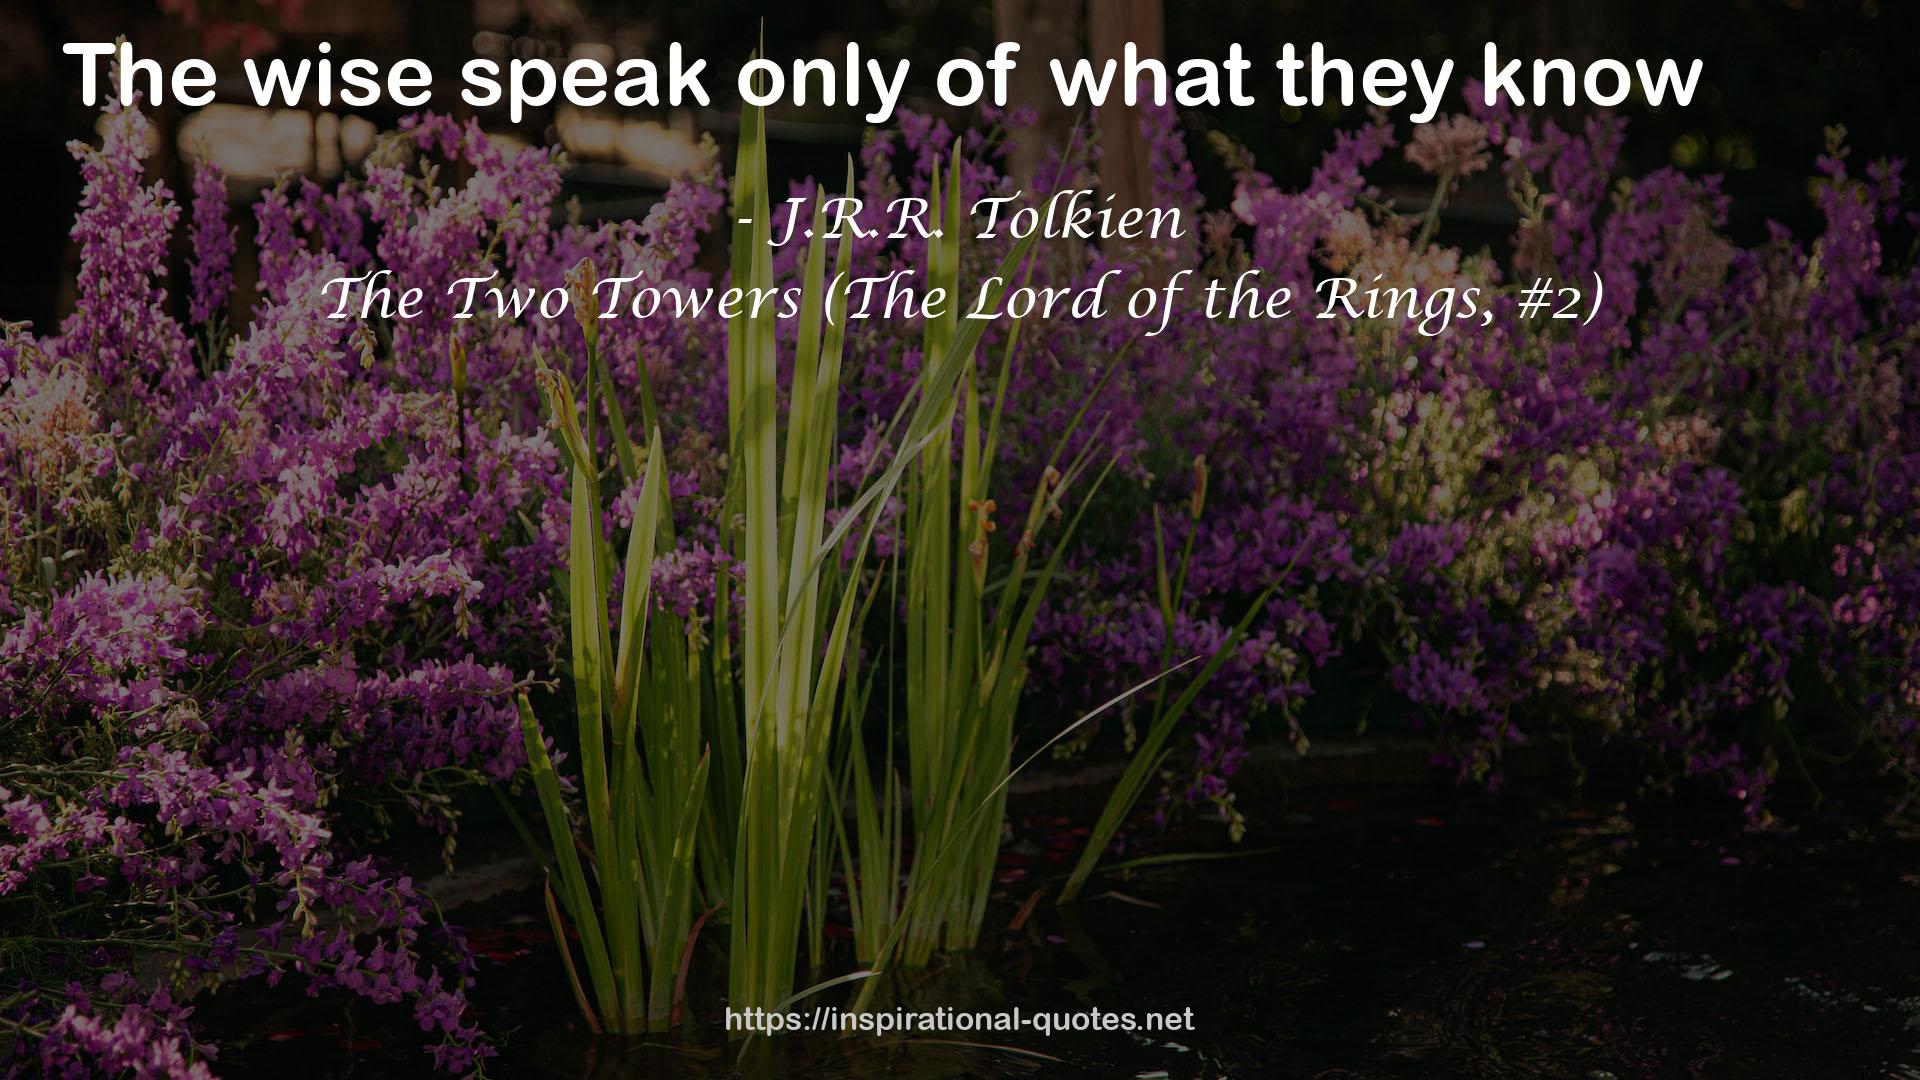 The Two Towers (The Lord of the Rings, #2) QUOTES